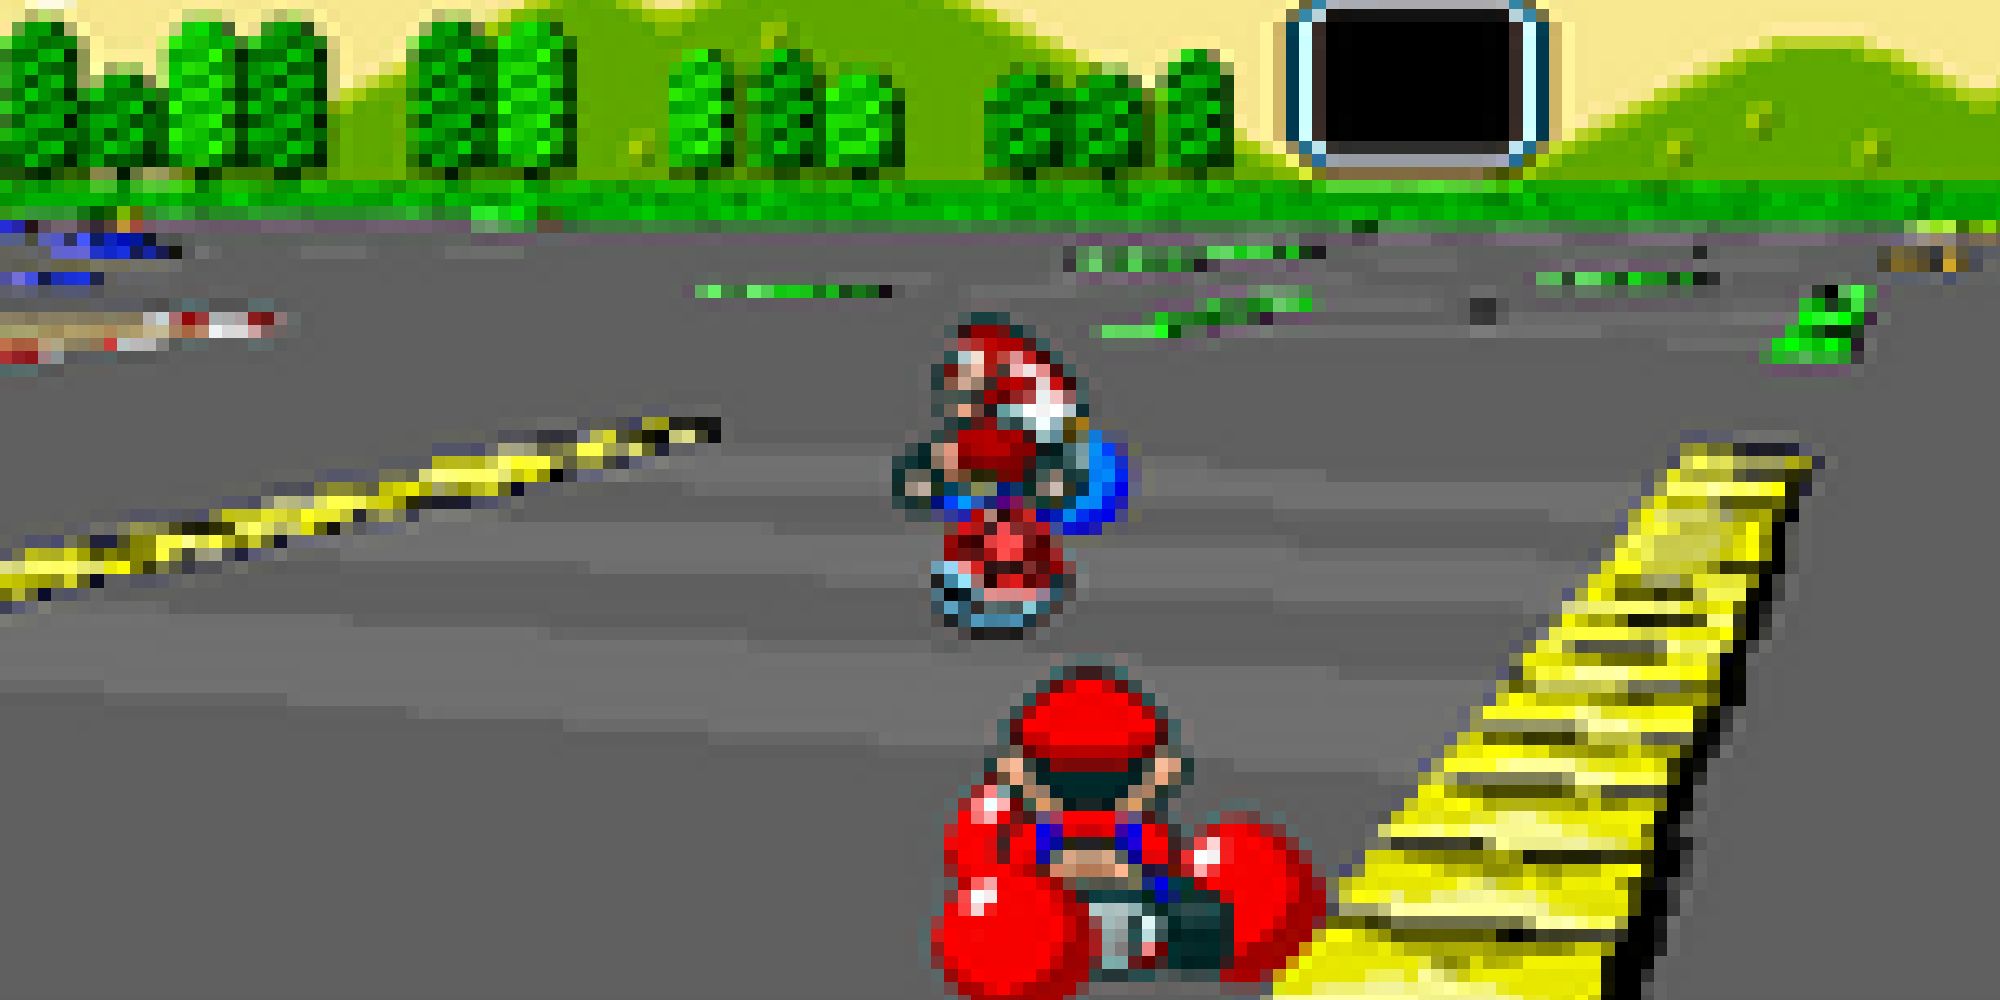 Mario chasing Donkey Kong Jr in a Balloon Fight in Super Mario Kart